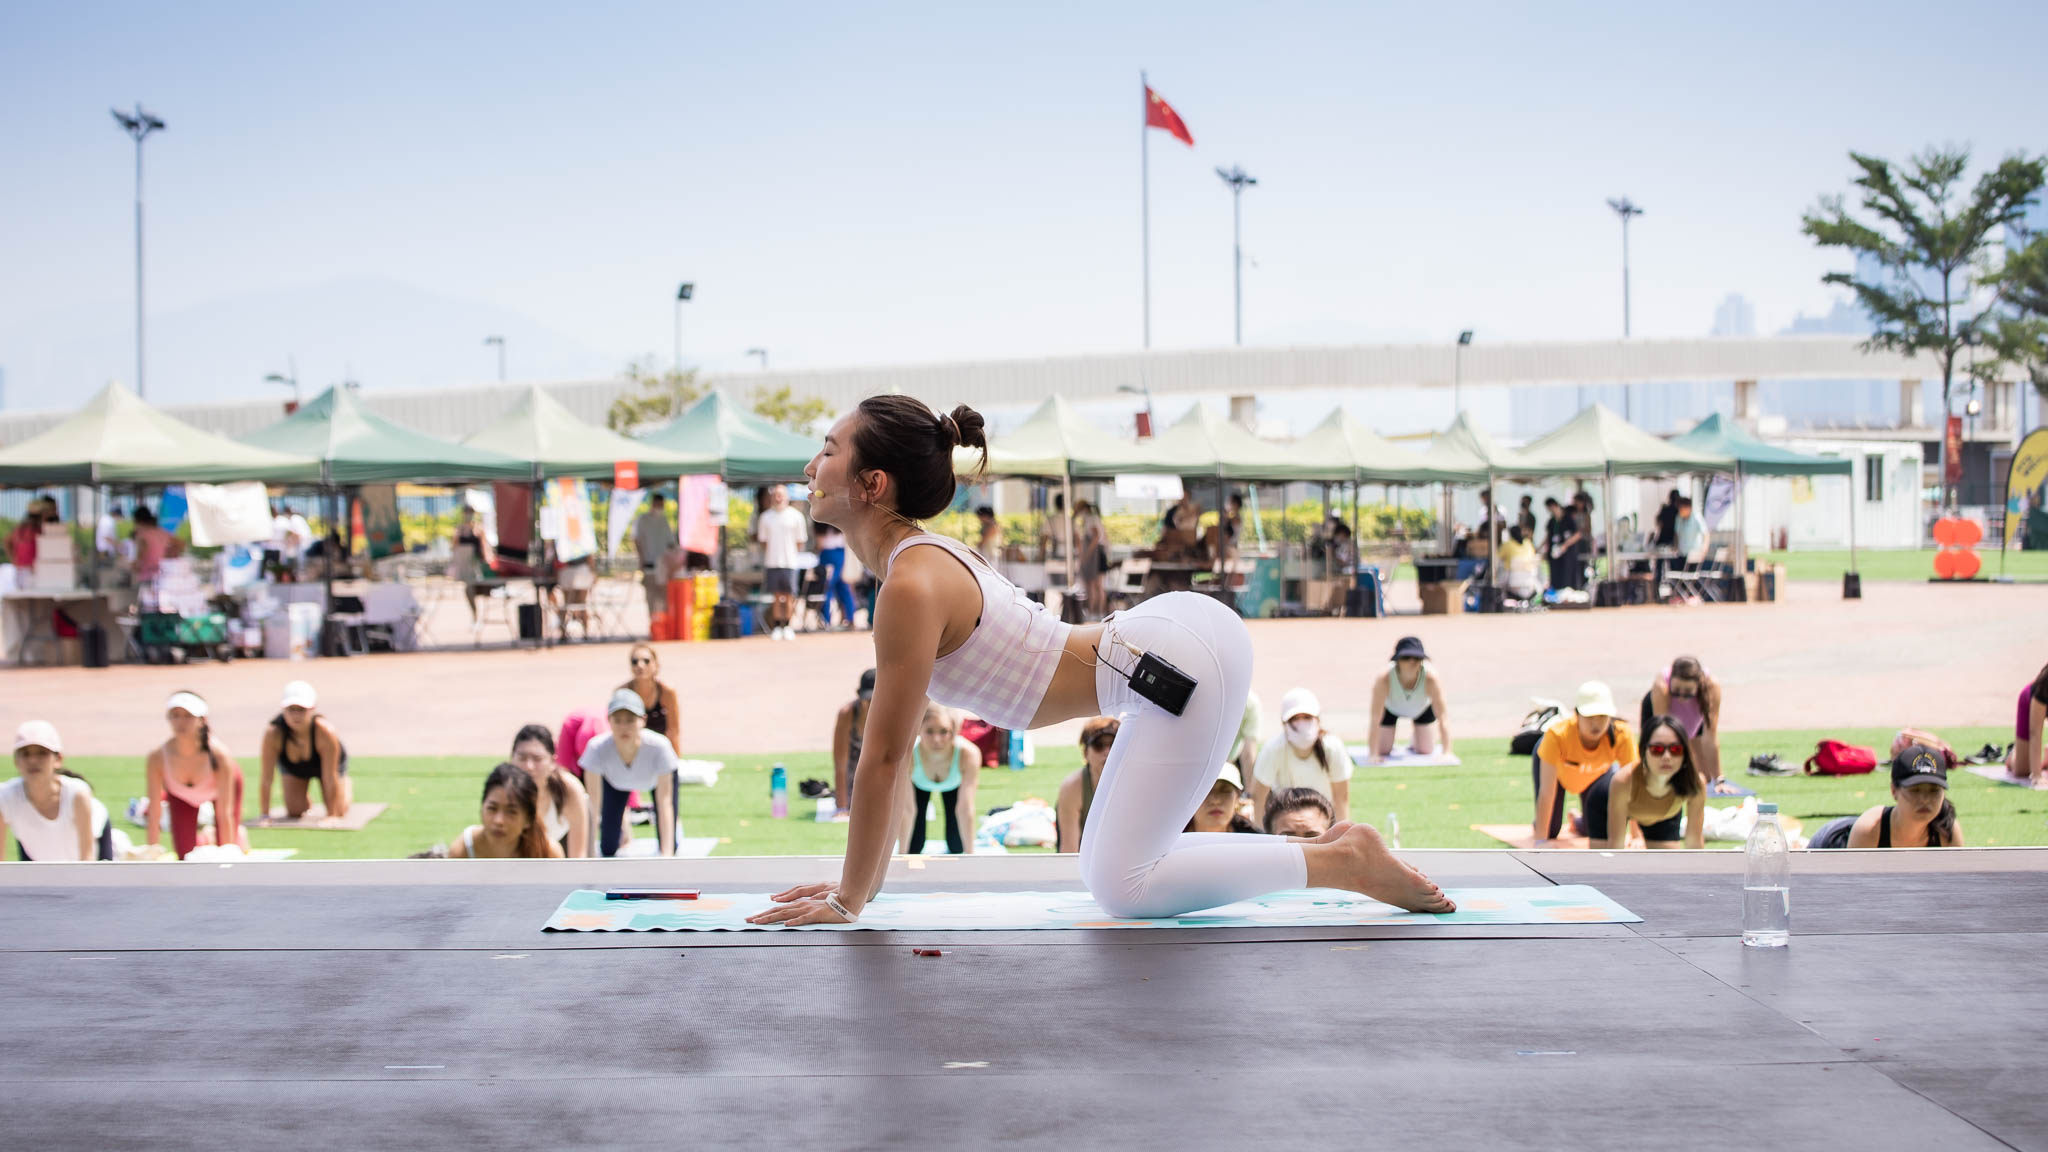 The “Fit & Well Festival 2.0” in Hong Kong is a two-night event featuring a dance party on June 16, 2023, and a moonlight yoga event on July 7, 2023. Photo: Denny Chan